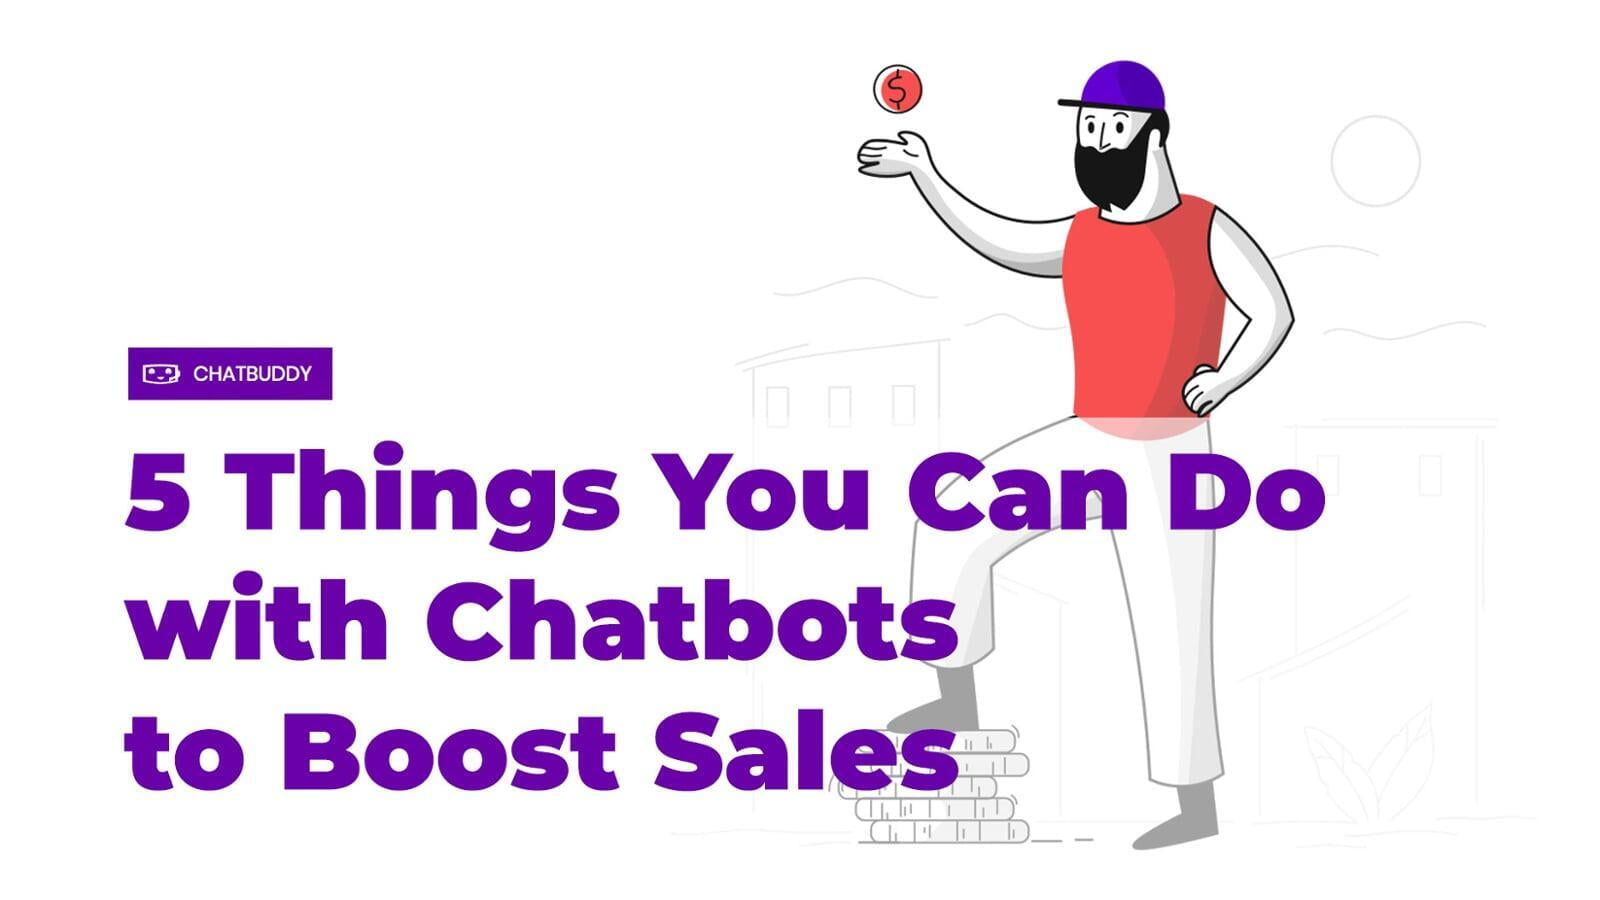 5 Things You Can Do with Chatbots to Boost Sales